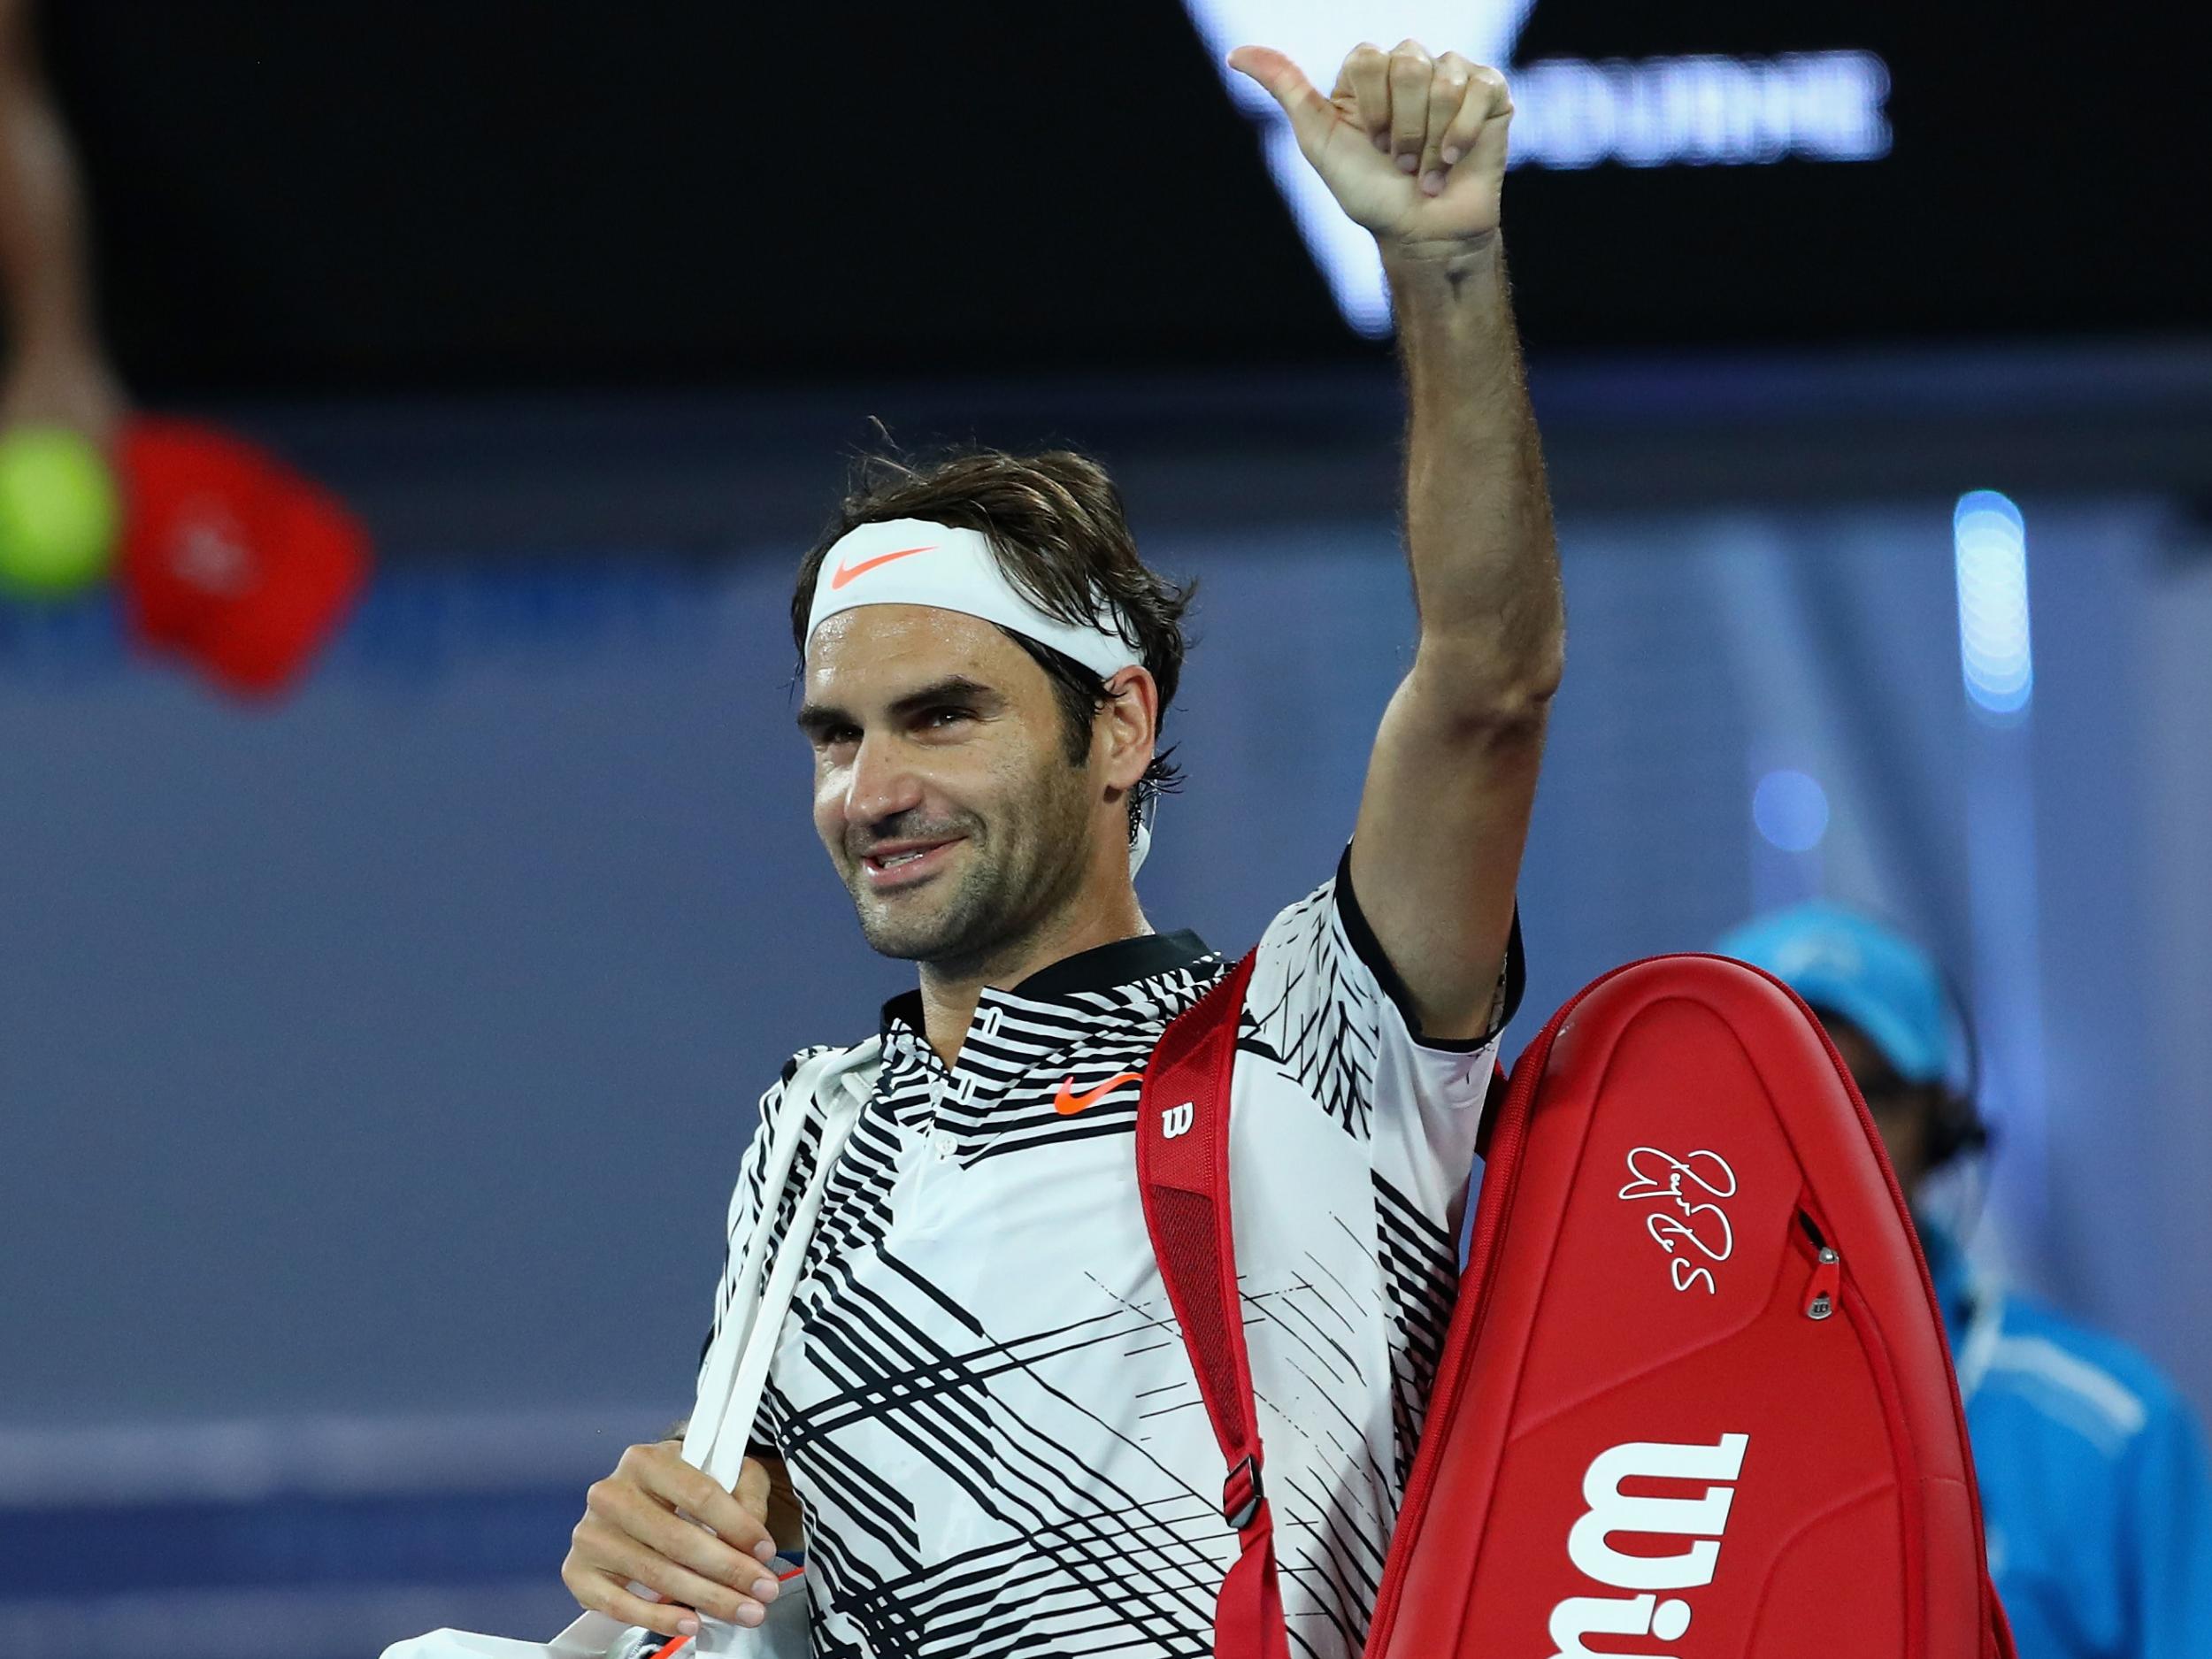 Roger Federer struggles through on Australian Open return and Stan Wawrinka has to dig deep on day one - The Independent